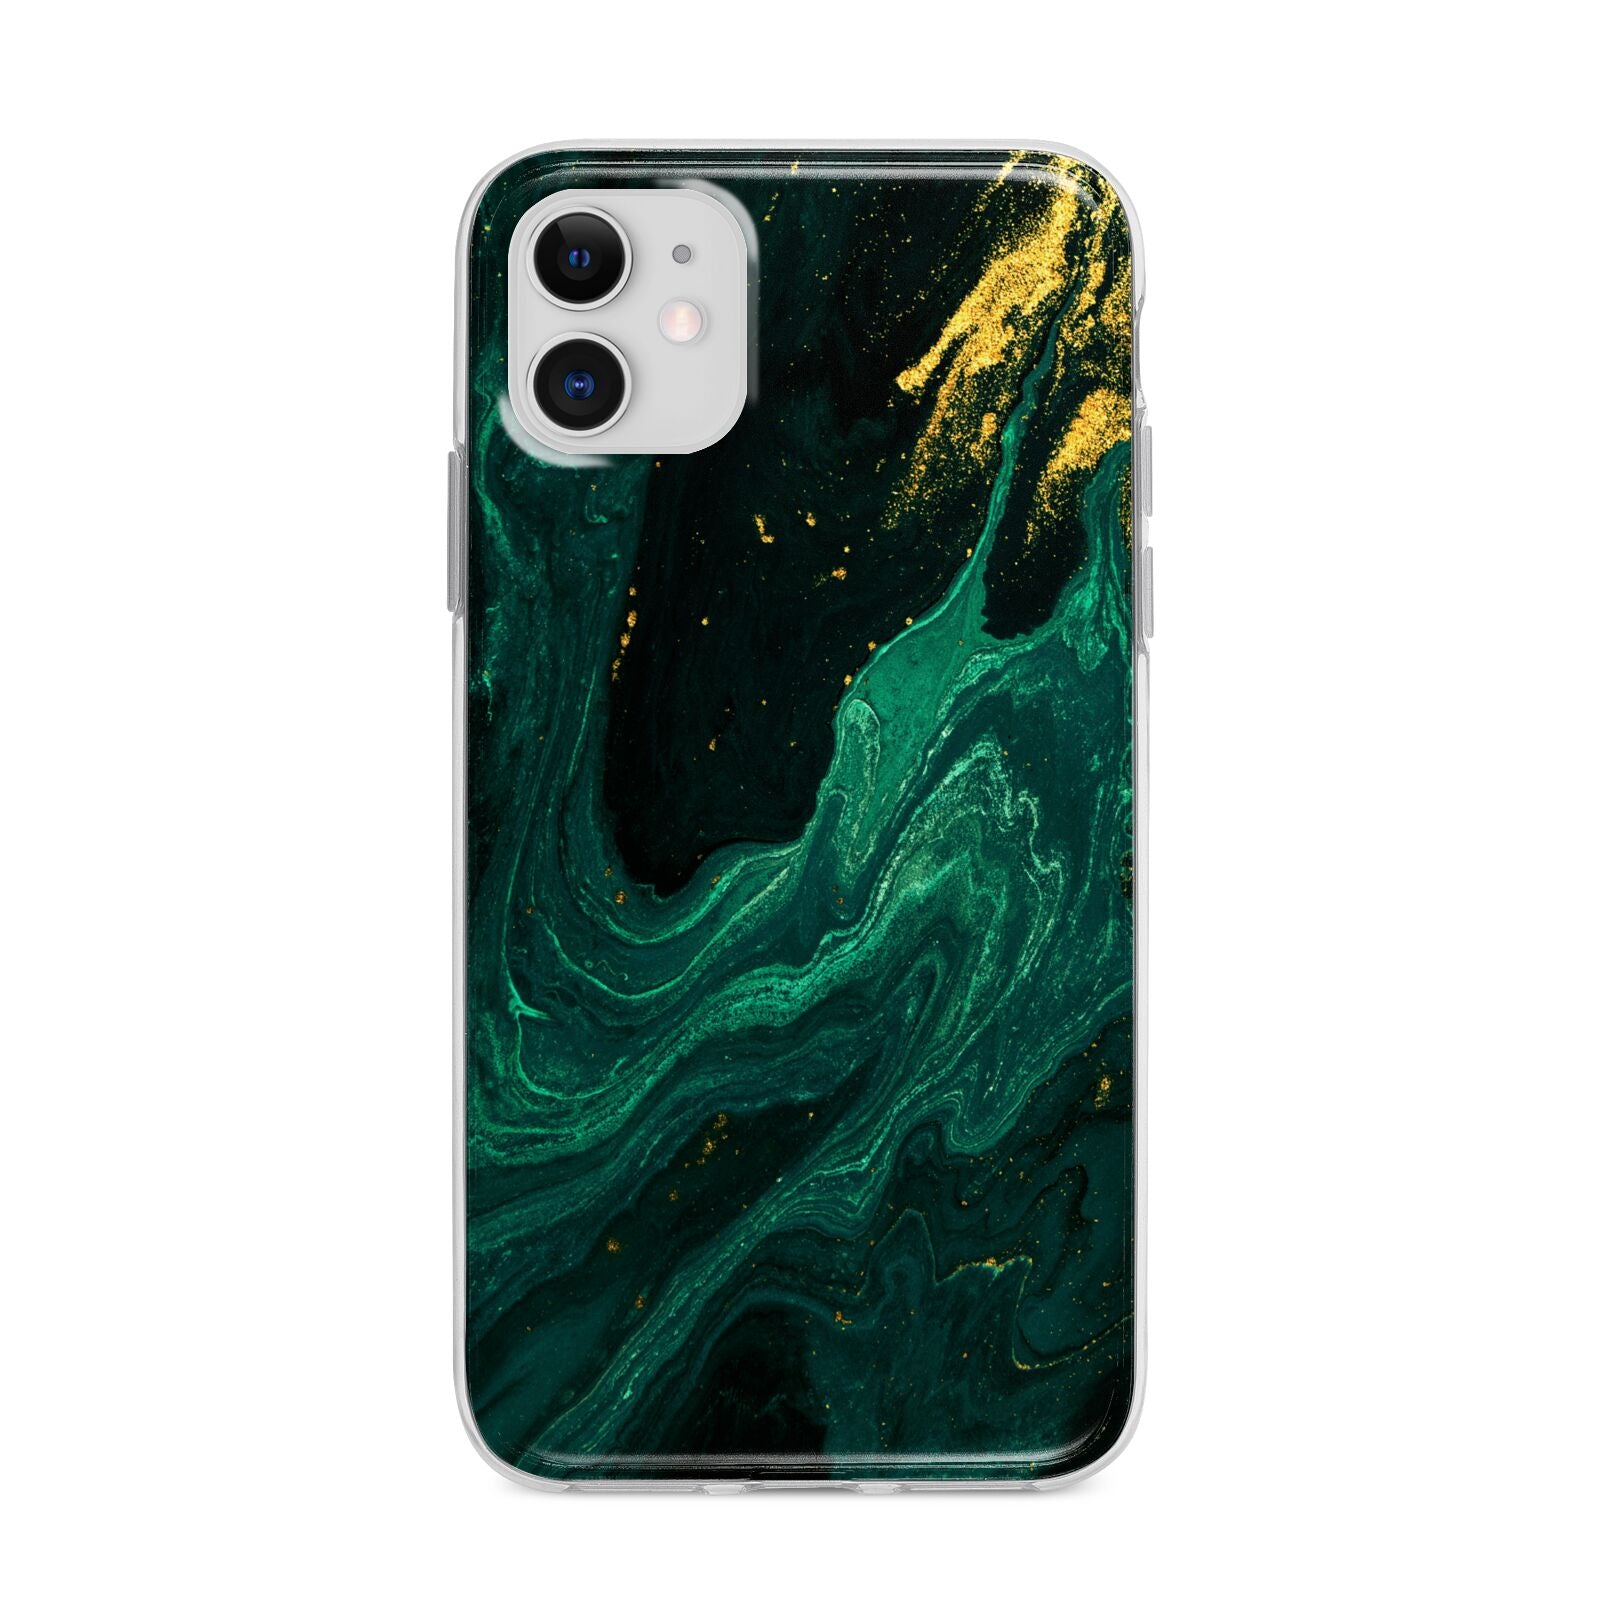 Emerald Green Apple iPhone 11 in White with Bumper Case